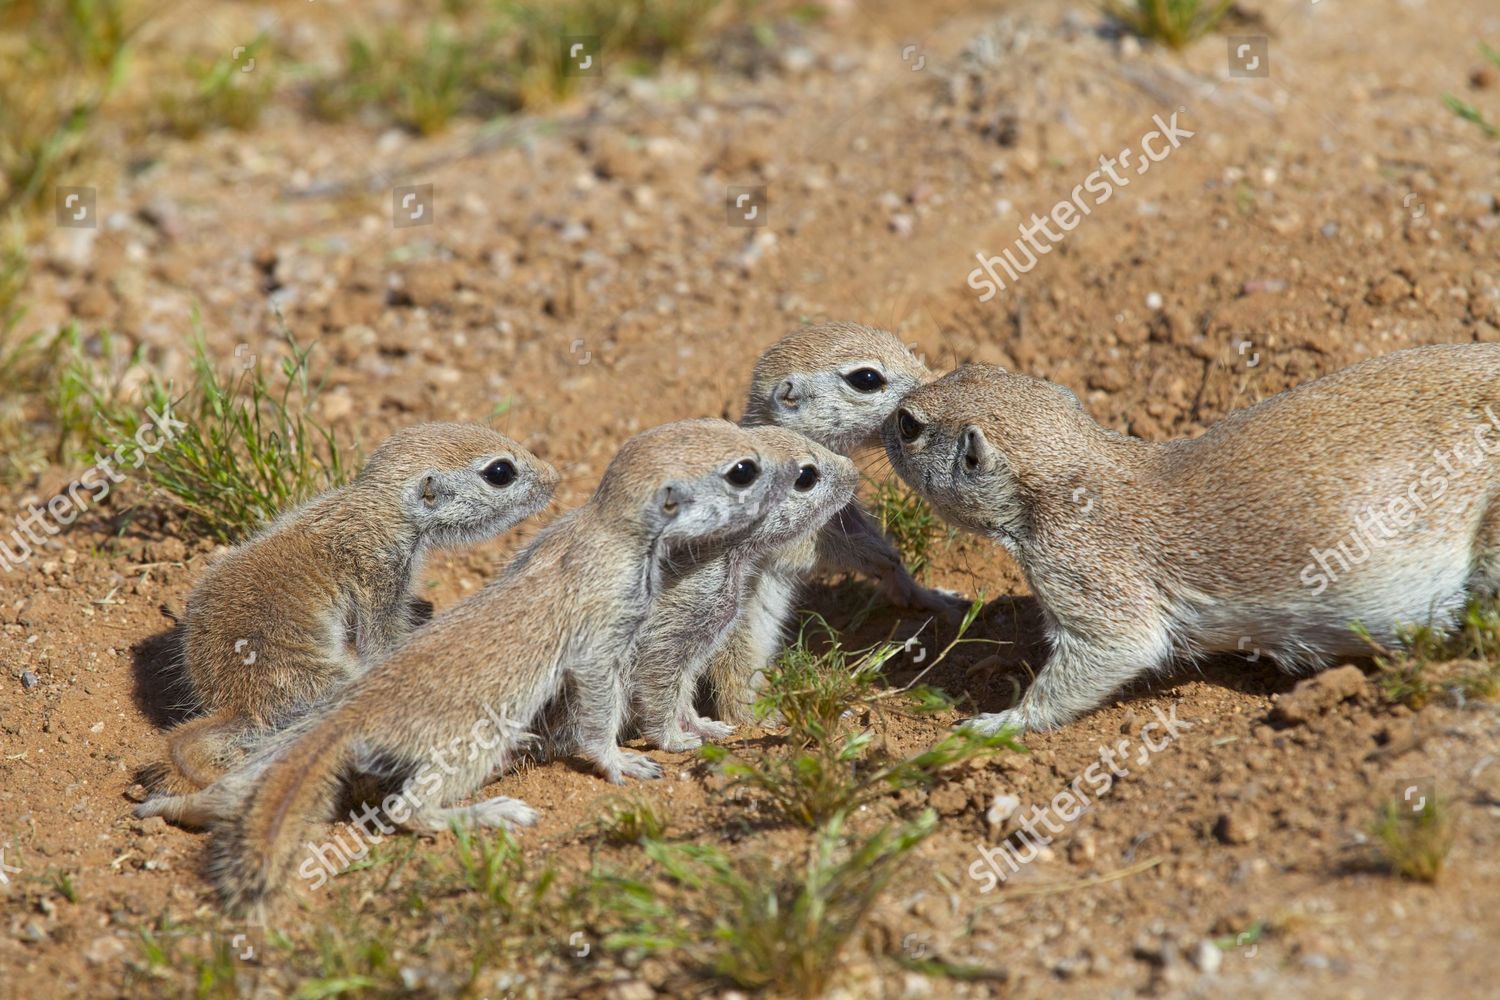 Baby Round Tailed Ground Squirrels Adult R Editorial Stock Photo Stock Image Shutterstock